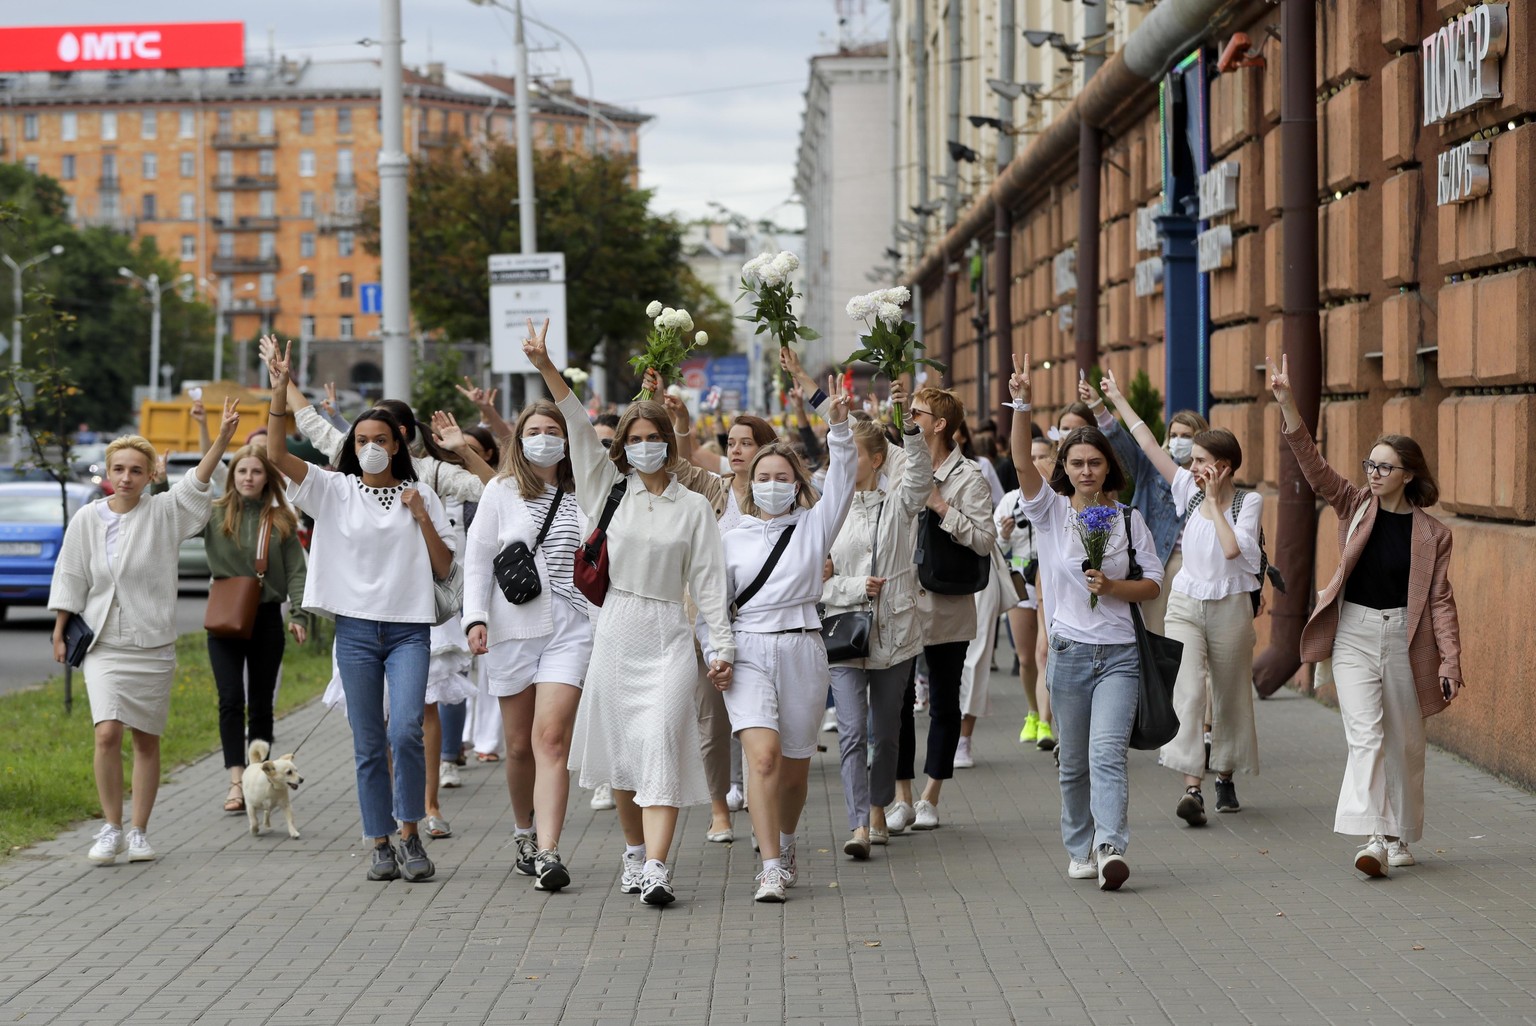 About 200 women march in solidarity with protesters injured in the latest rallies against the results of the country&#039;s presidential election in Minsk, Belarus, Wednesday, Aug. 12, 2020. Belarus o ...